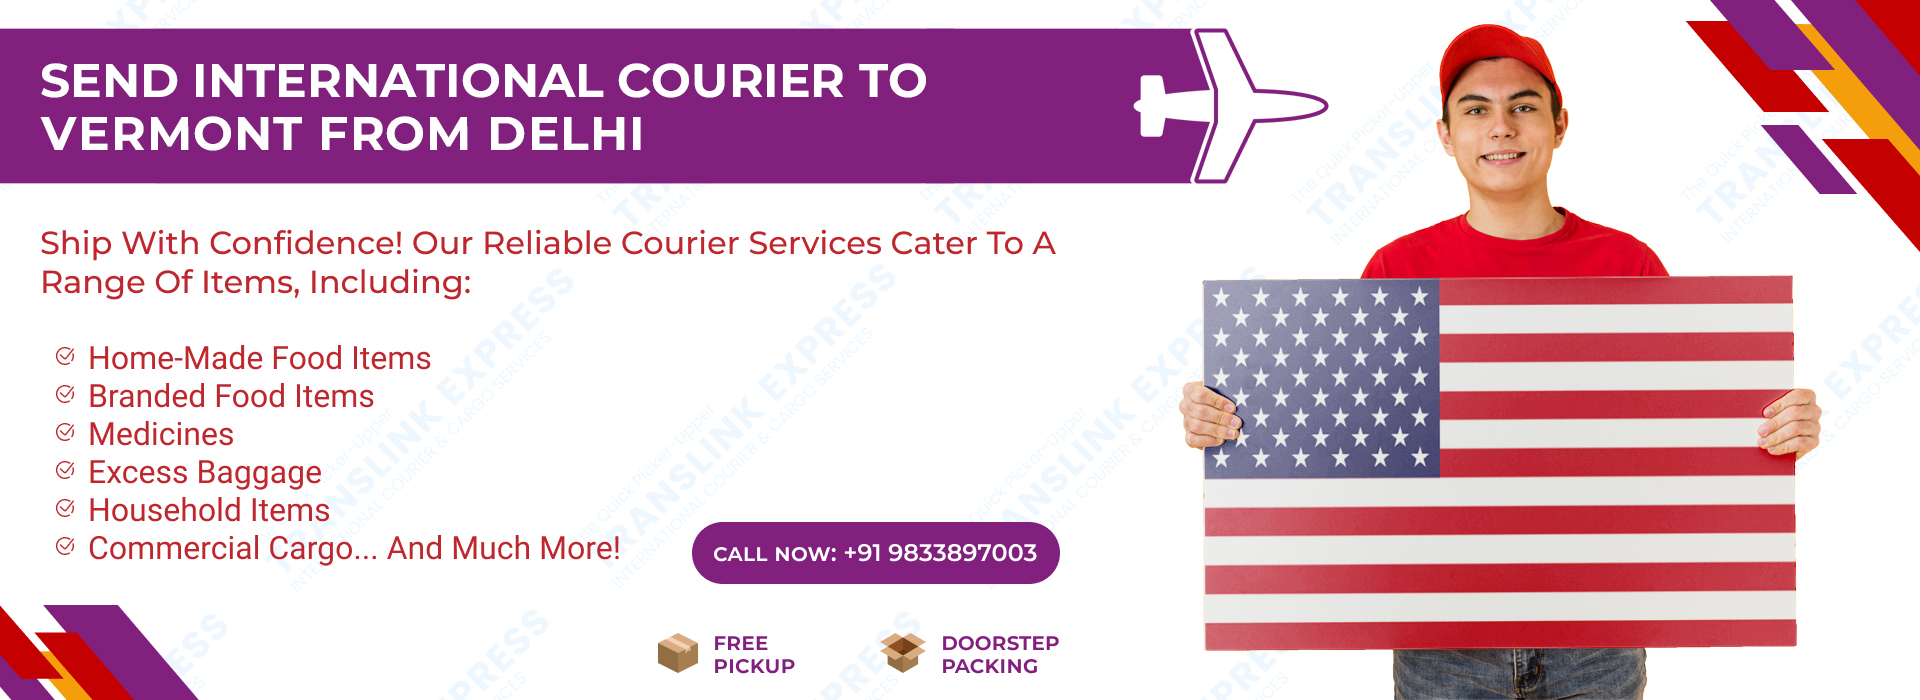 Courier to Vermont From Delhi